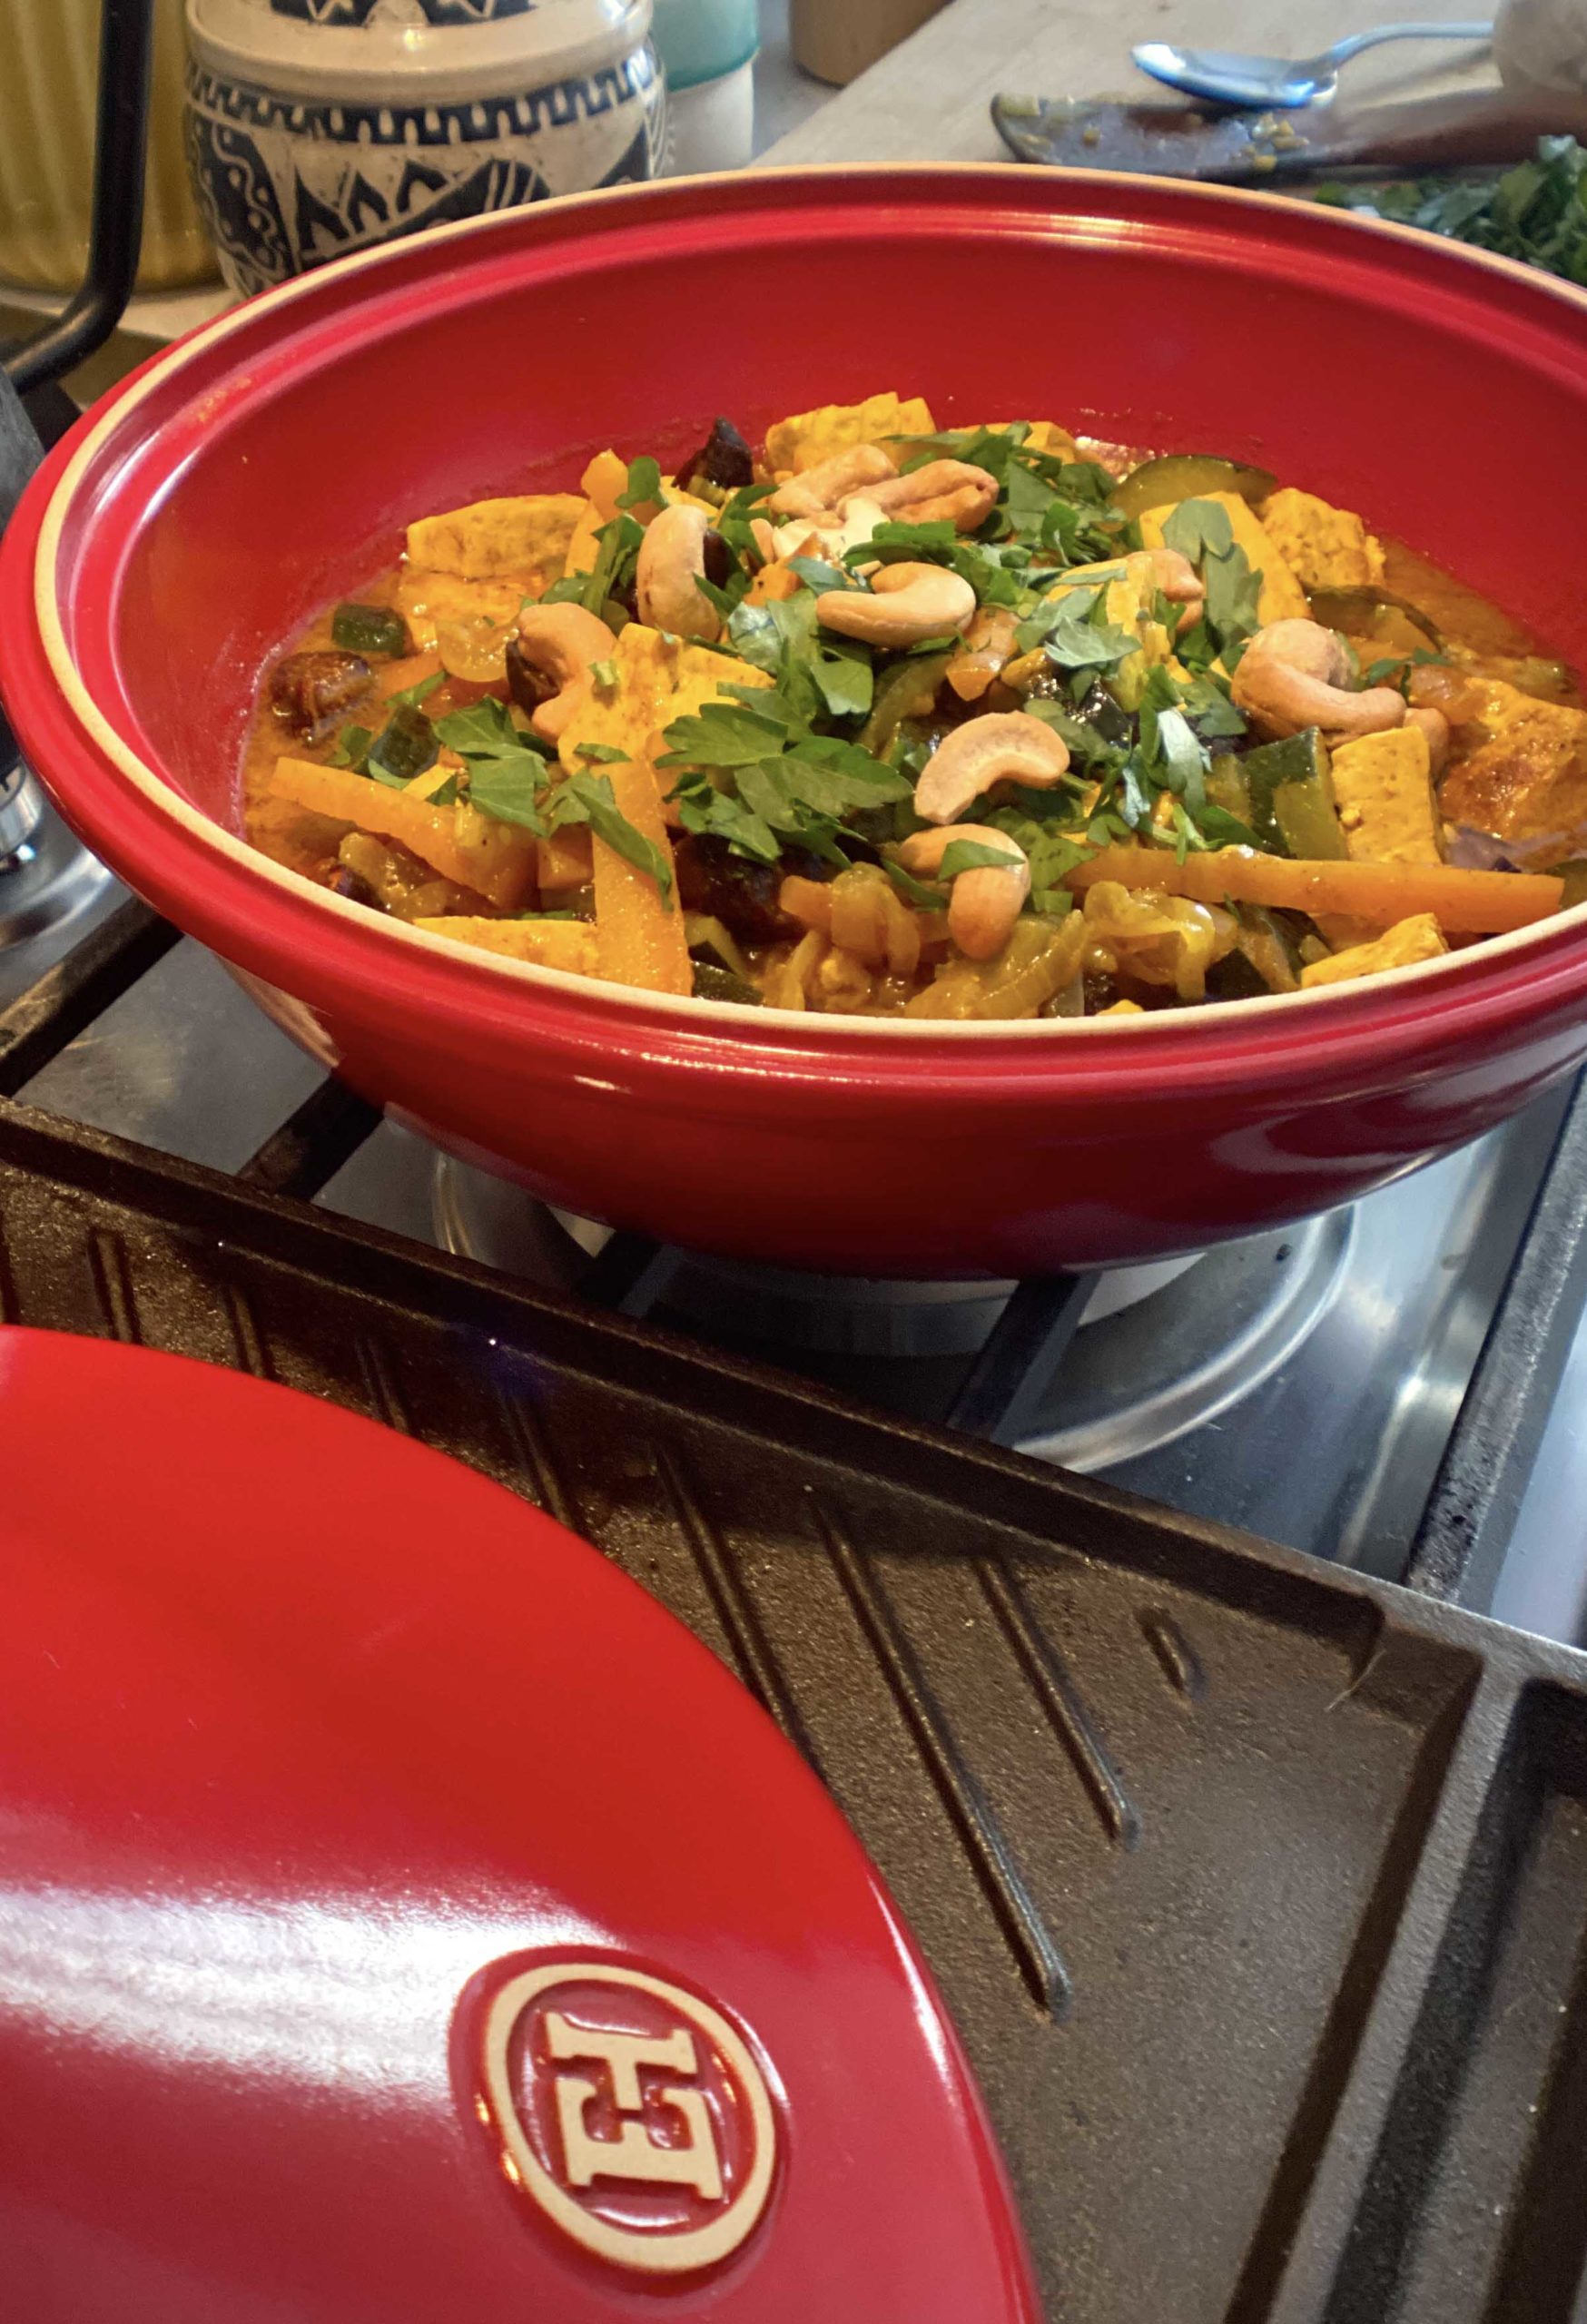 What to cook in a tagine that's meatless: fig tofu tagine